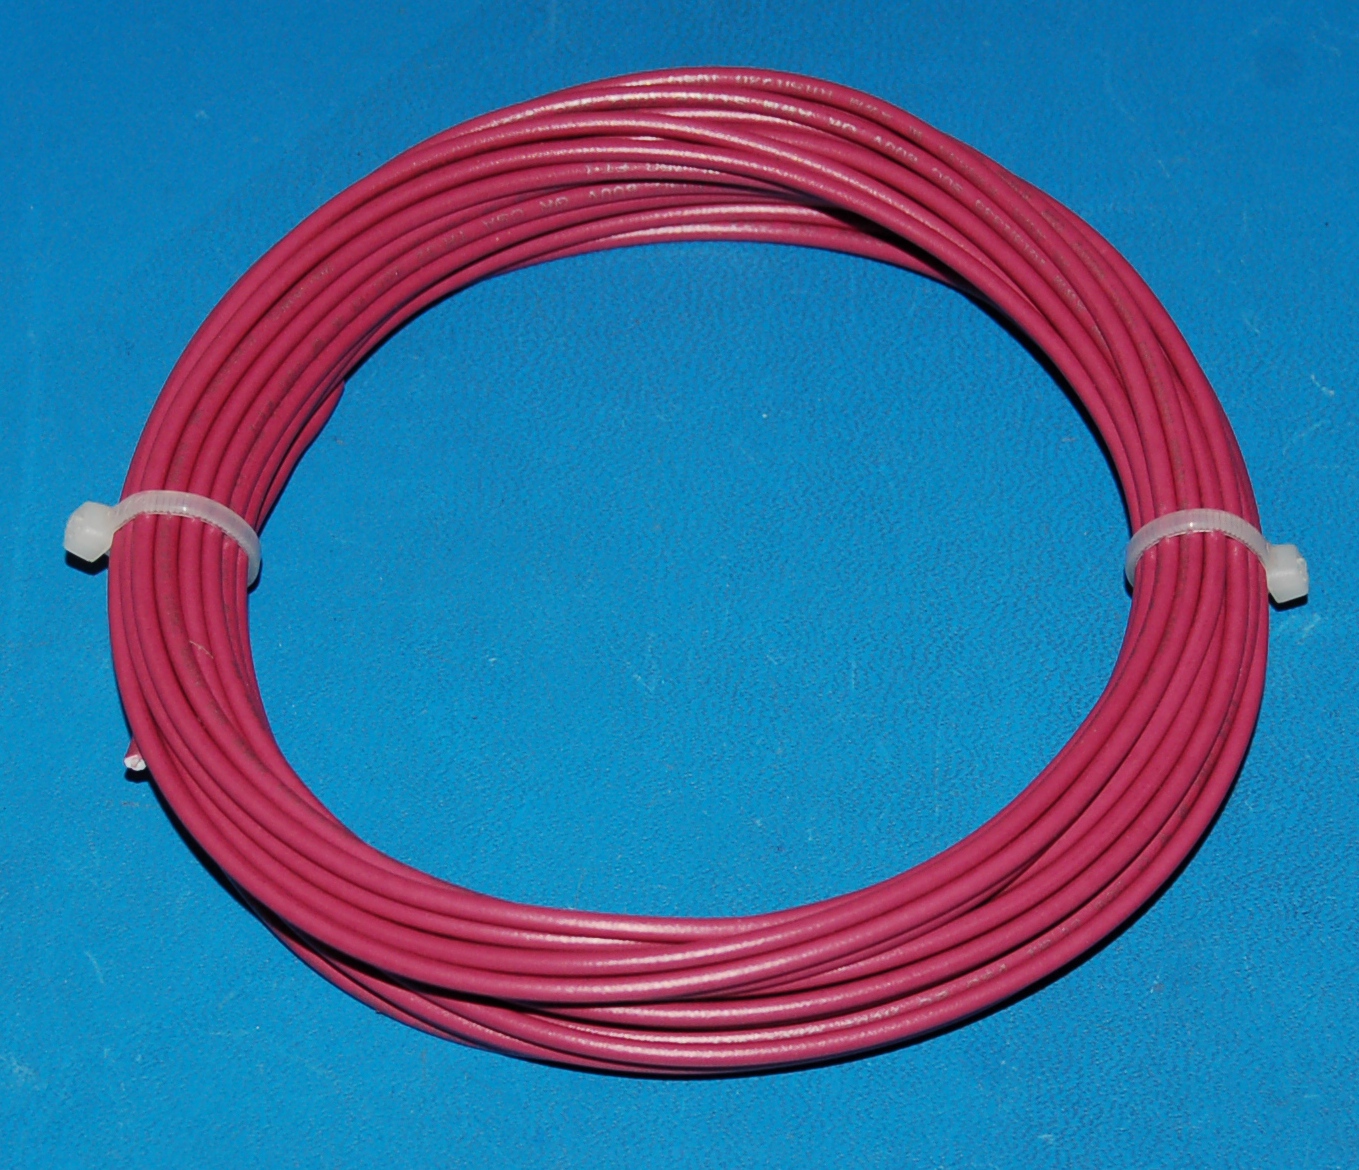 Solid Tinned Copper Wire, 600V, #20 AWG x 25' (Purple)